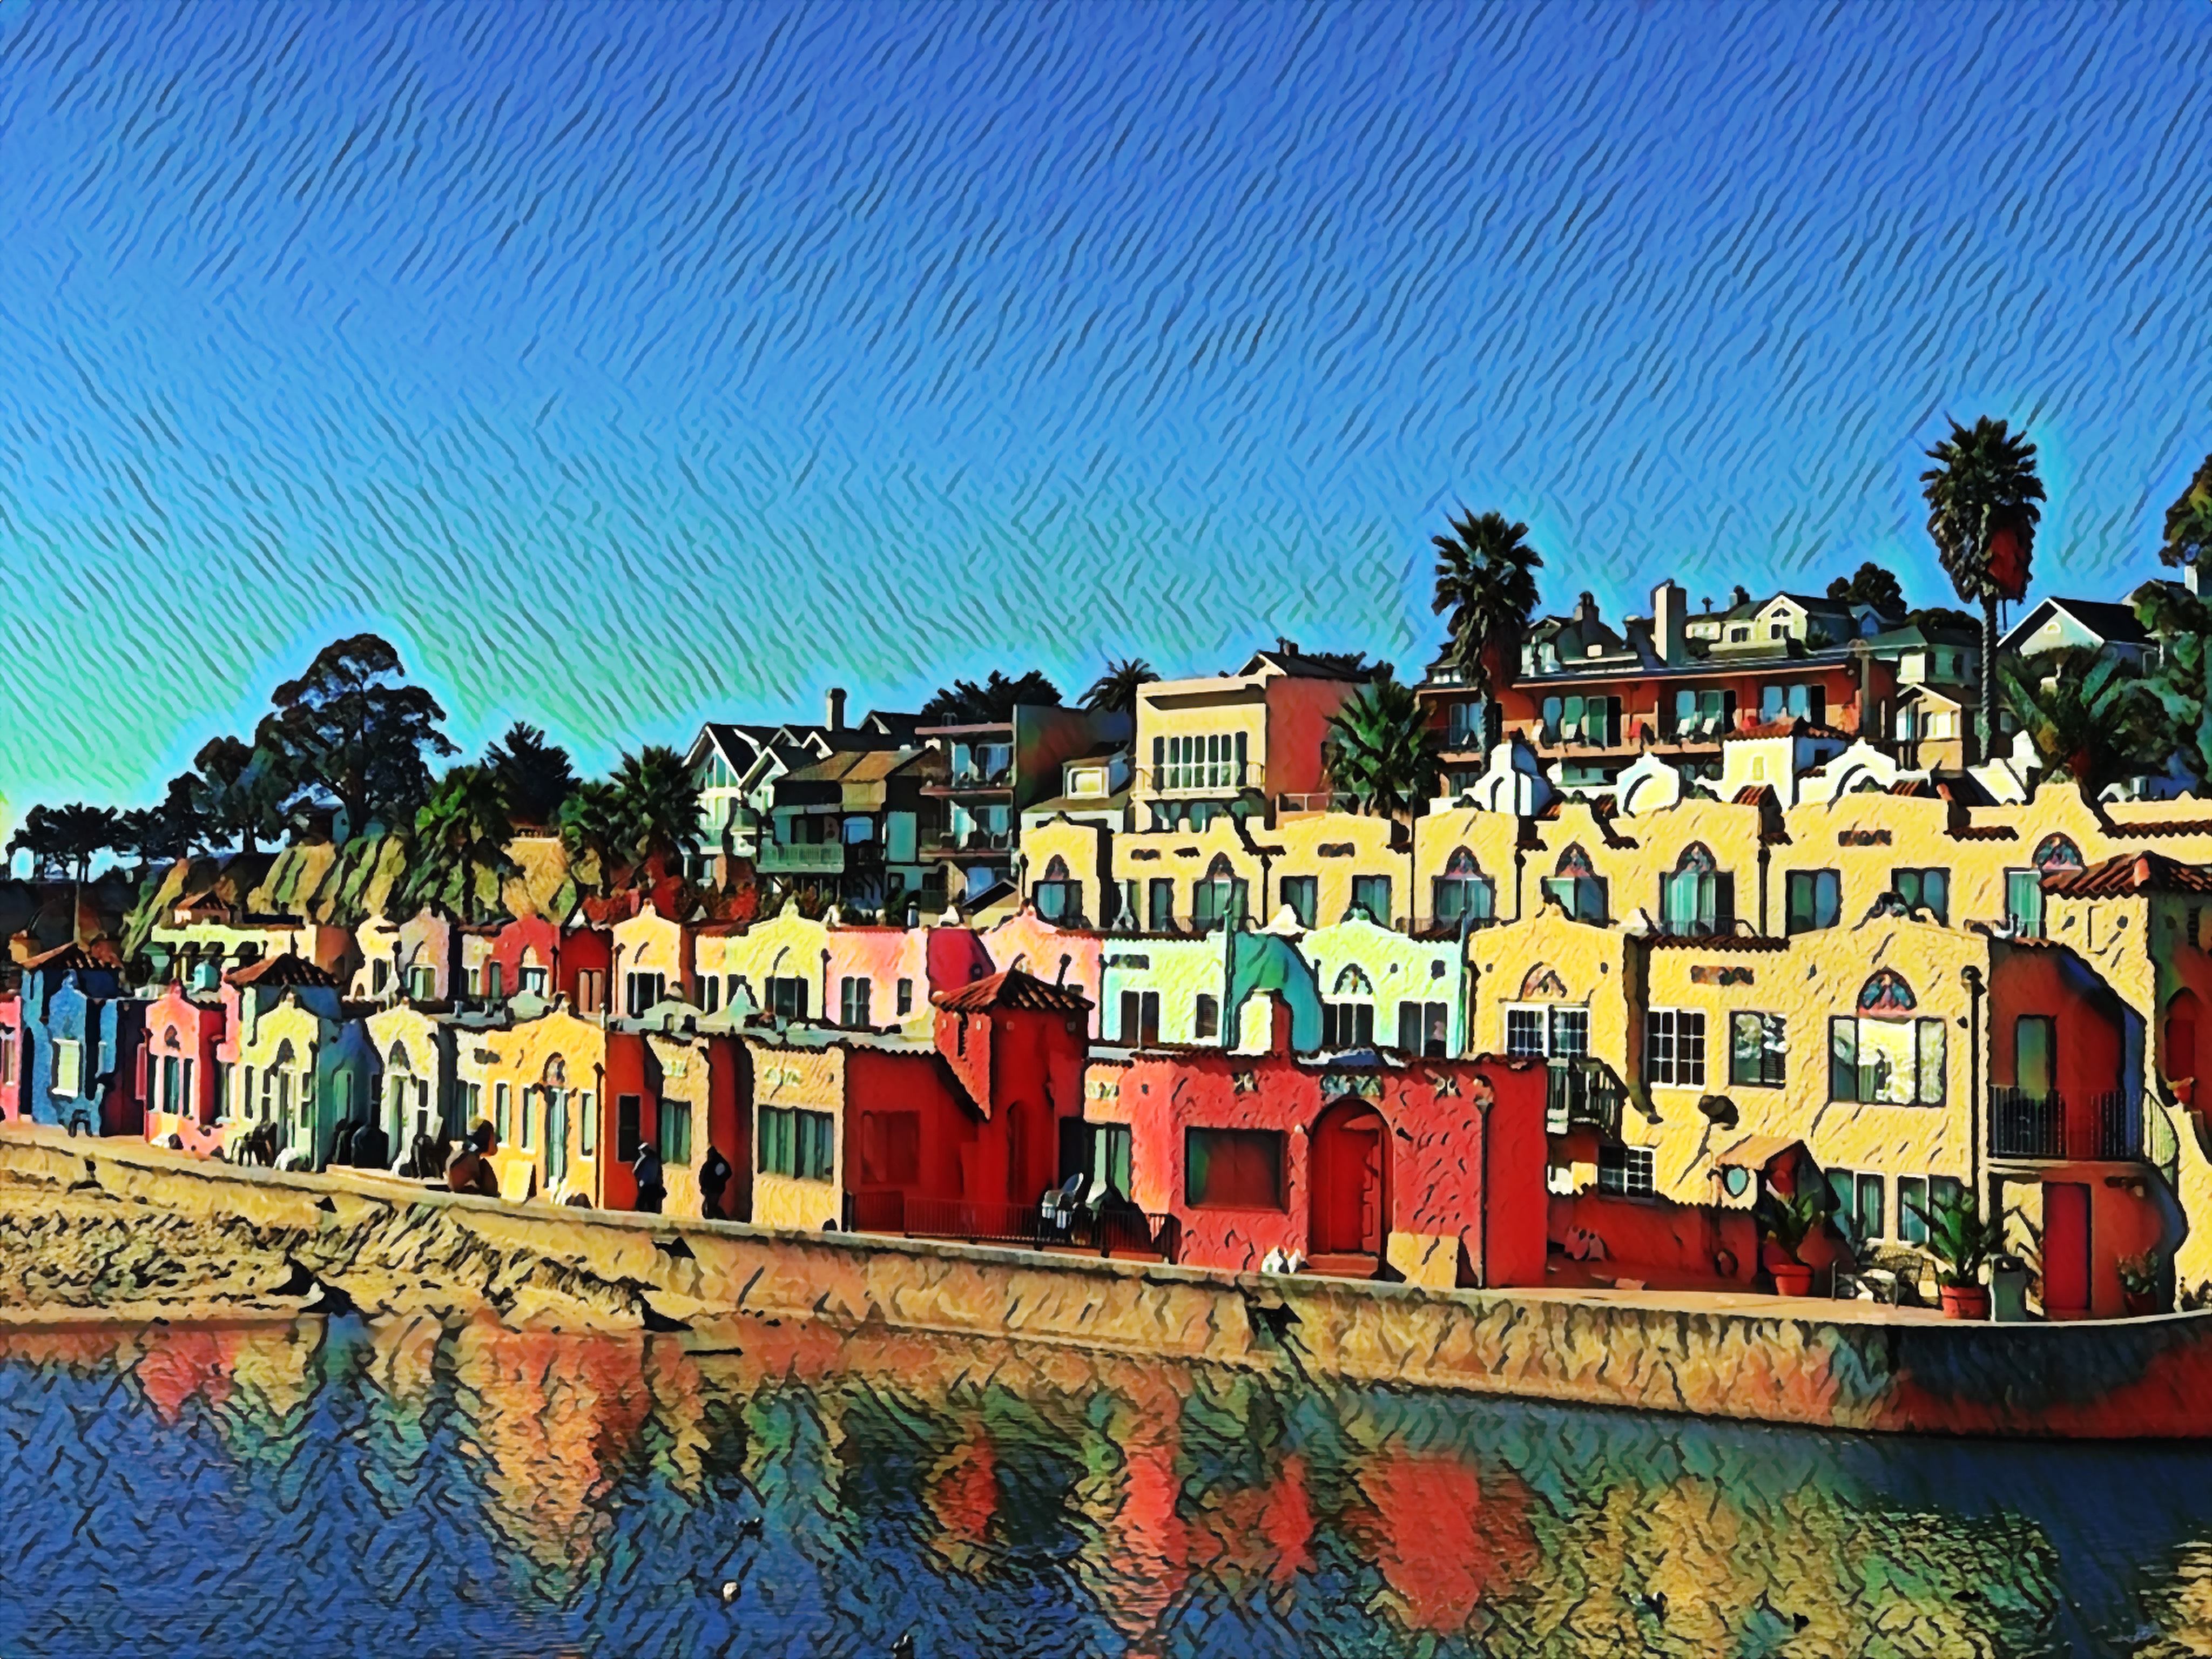 Capitola Village by the Sea